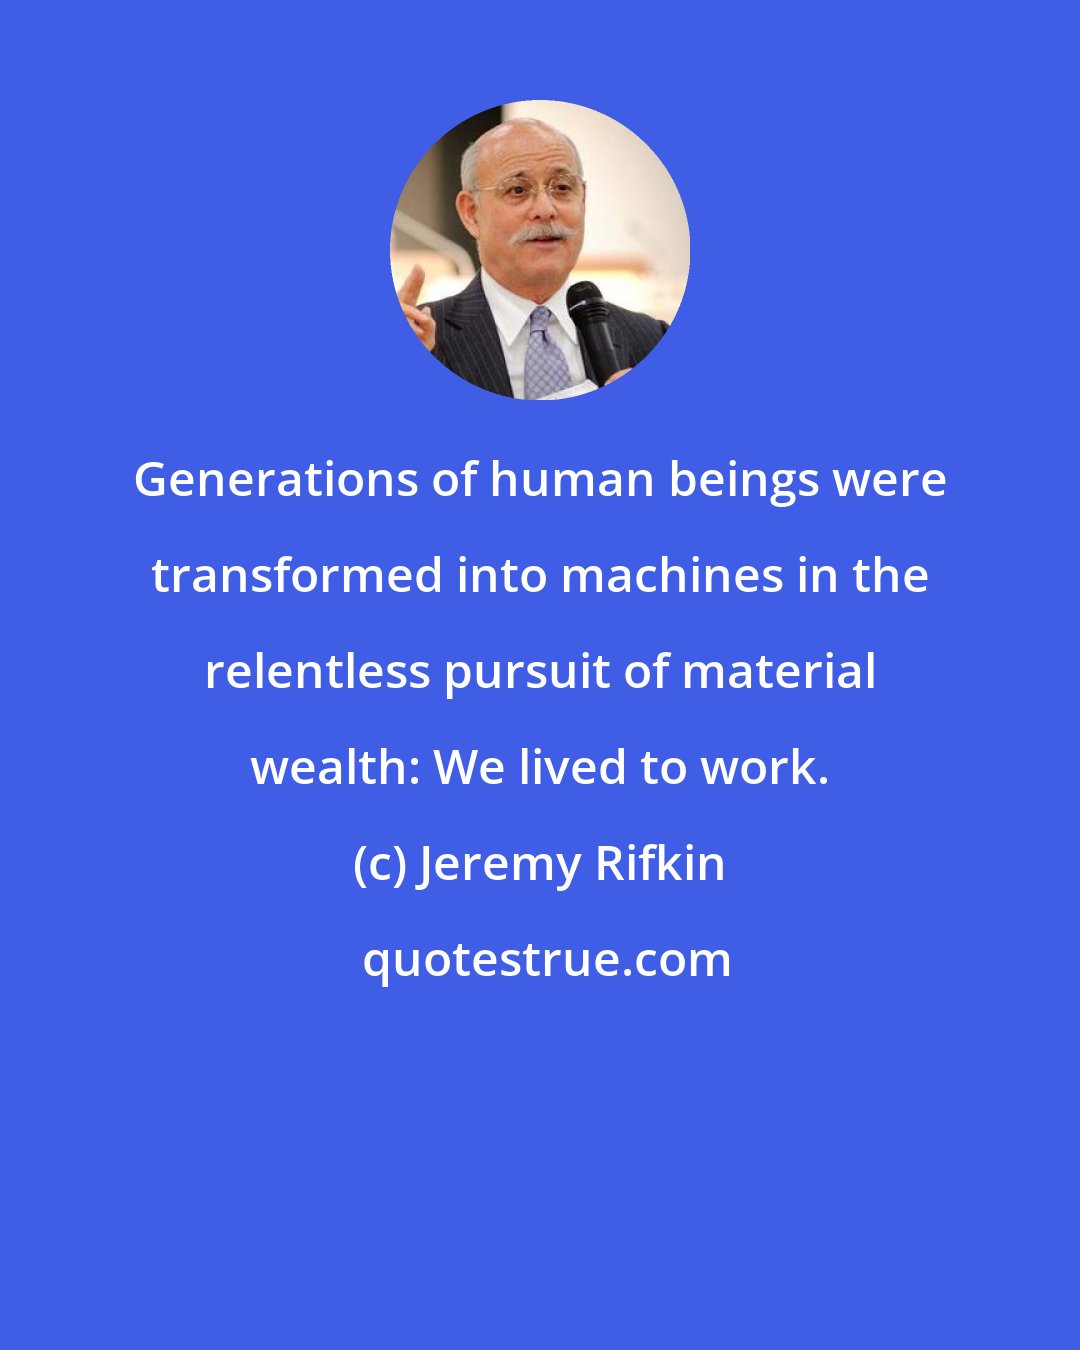 Jeremy Rifkin: Generations of human beings were transformed into machines in the relentless pursuit of material wealth: We lived to work.